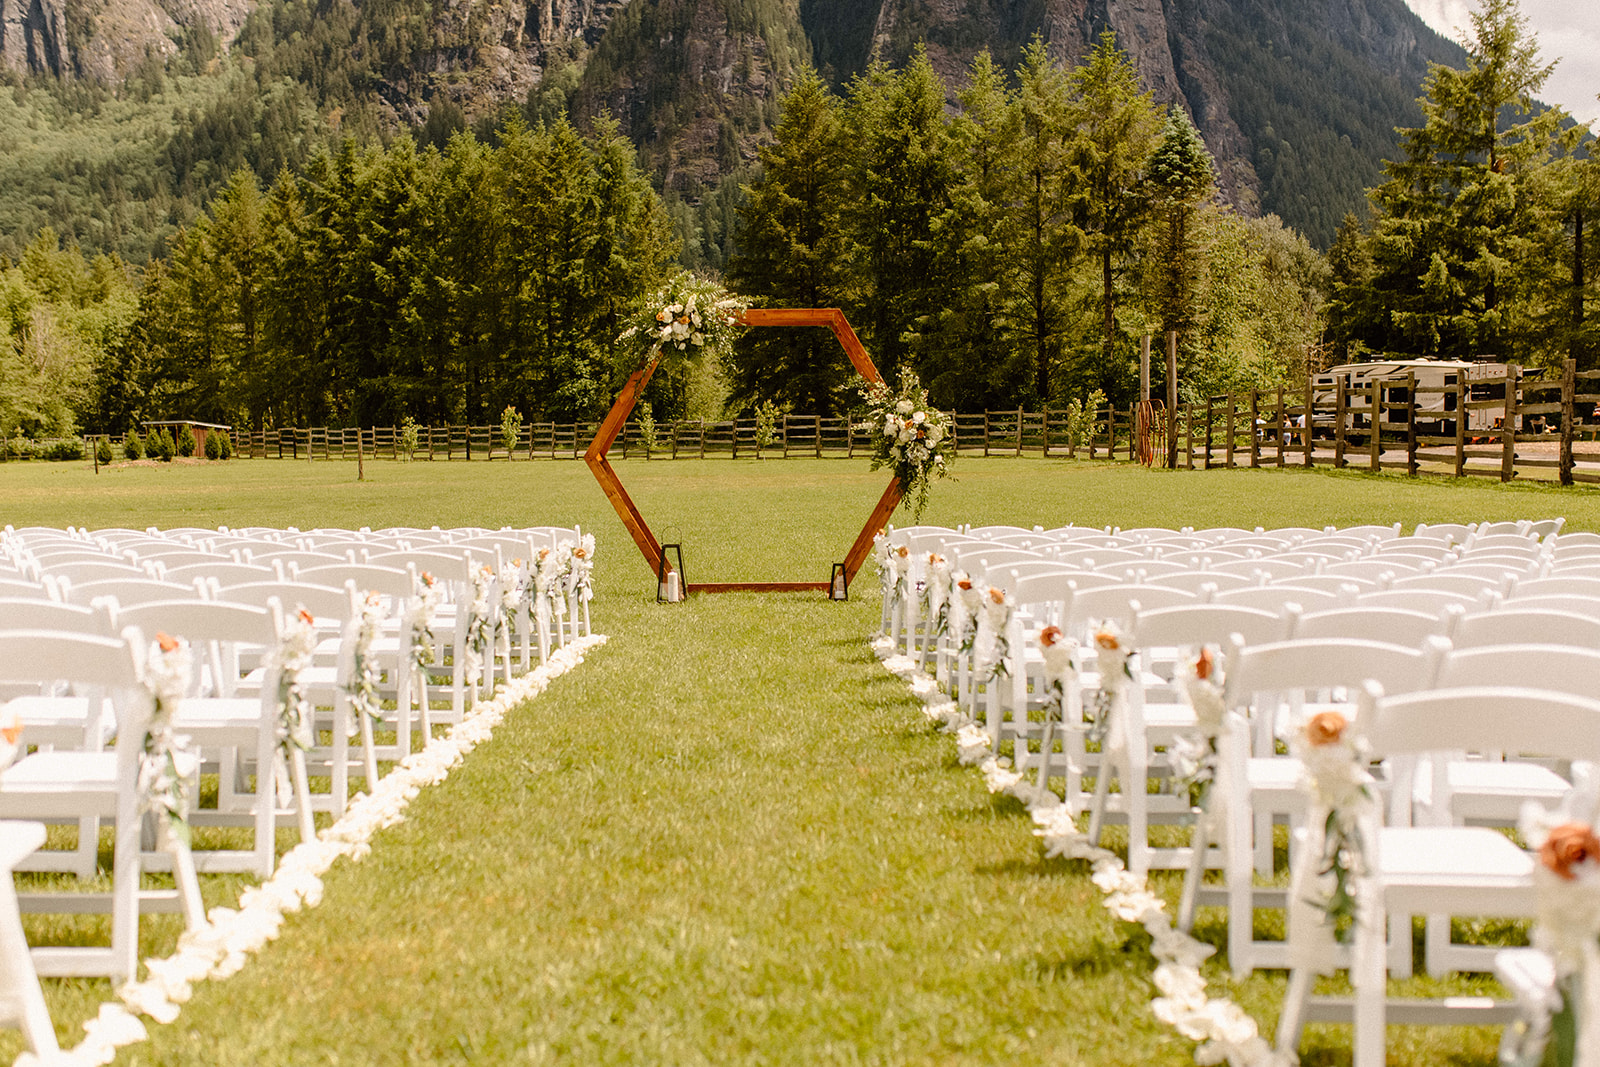 Wedding in Snoqualmie Washington with rustic colors and florals